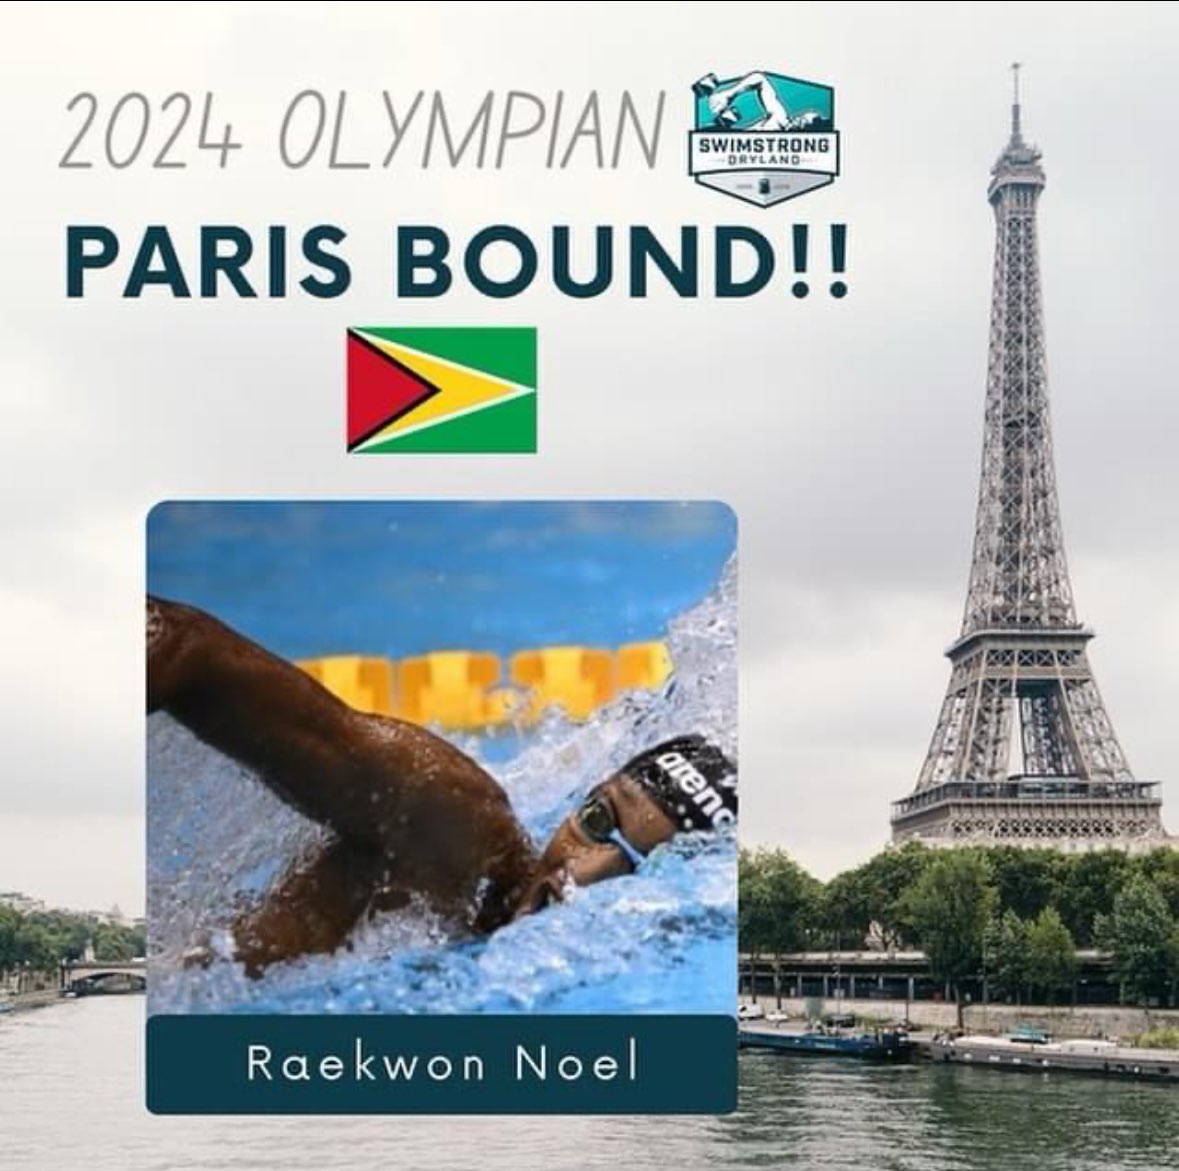 Raekwon Noel YOU’RE A FREAKING OLYMPIAN BRO!!!!!! LET’S GOOOOO!!!!!🇬🇾🇬🇾🔥🔥 Massive congratulations to you and your coaches and family!! We can’t wait to see what you do in Paris reppin Guyana!!!! SHOCK THE WORLD!!
#Olympian
#SSDLFam
#Paris2024
#EmbraceTheGrind
#WhateverItTakes